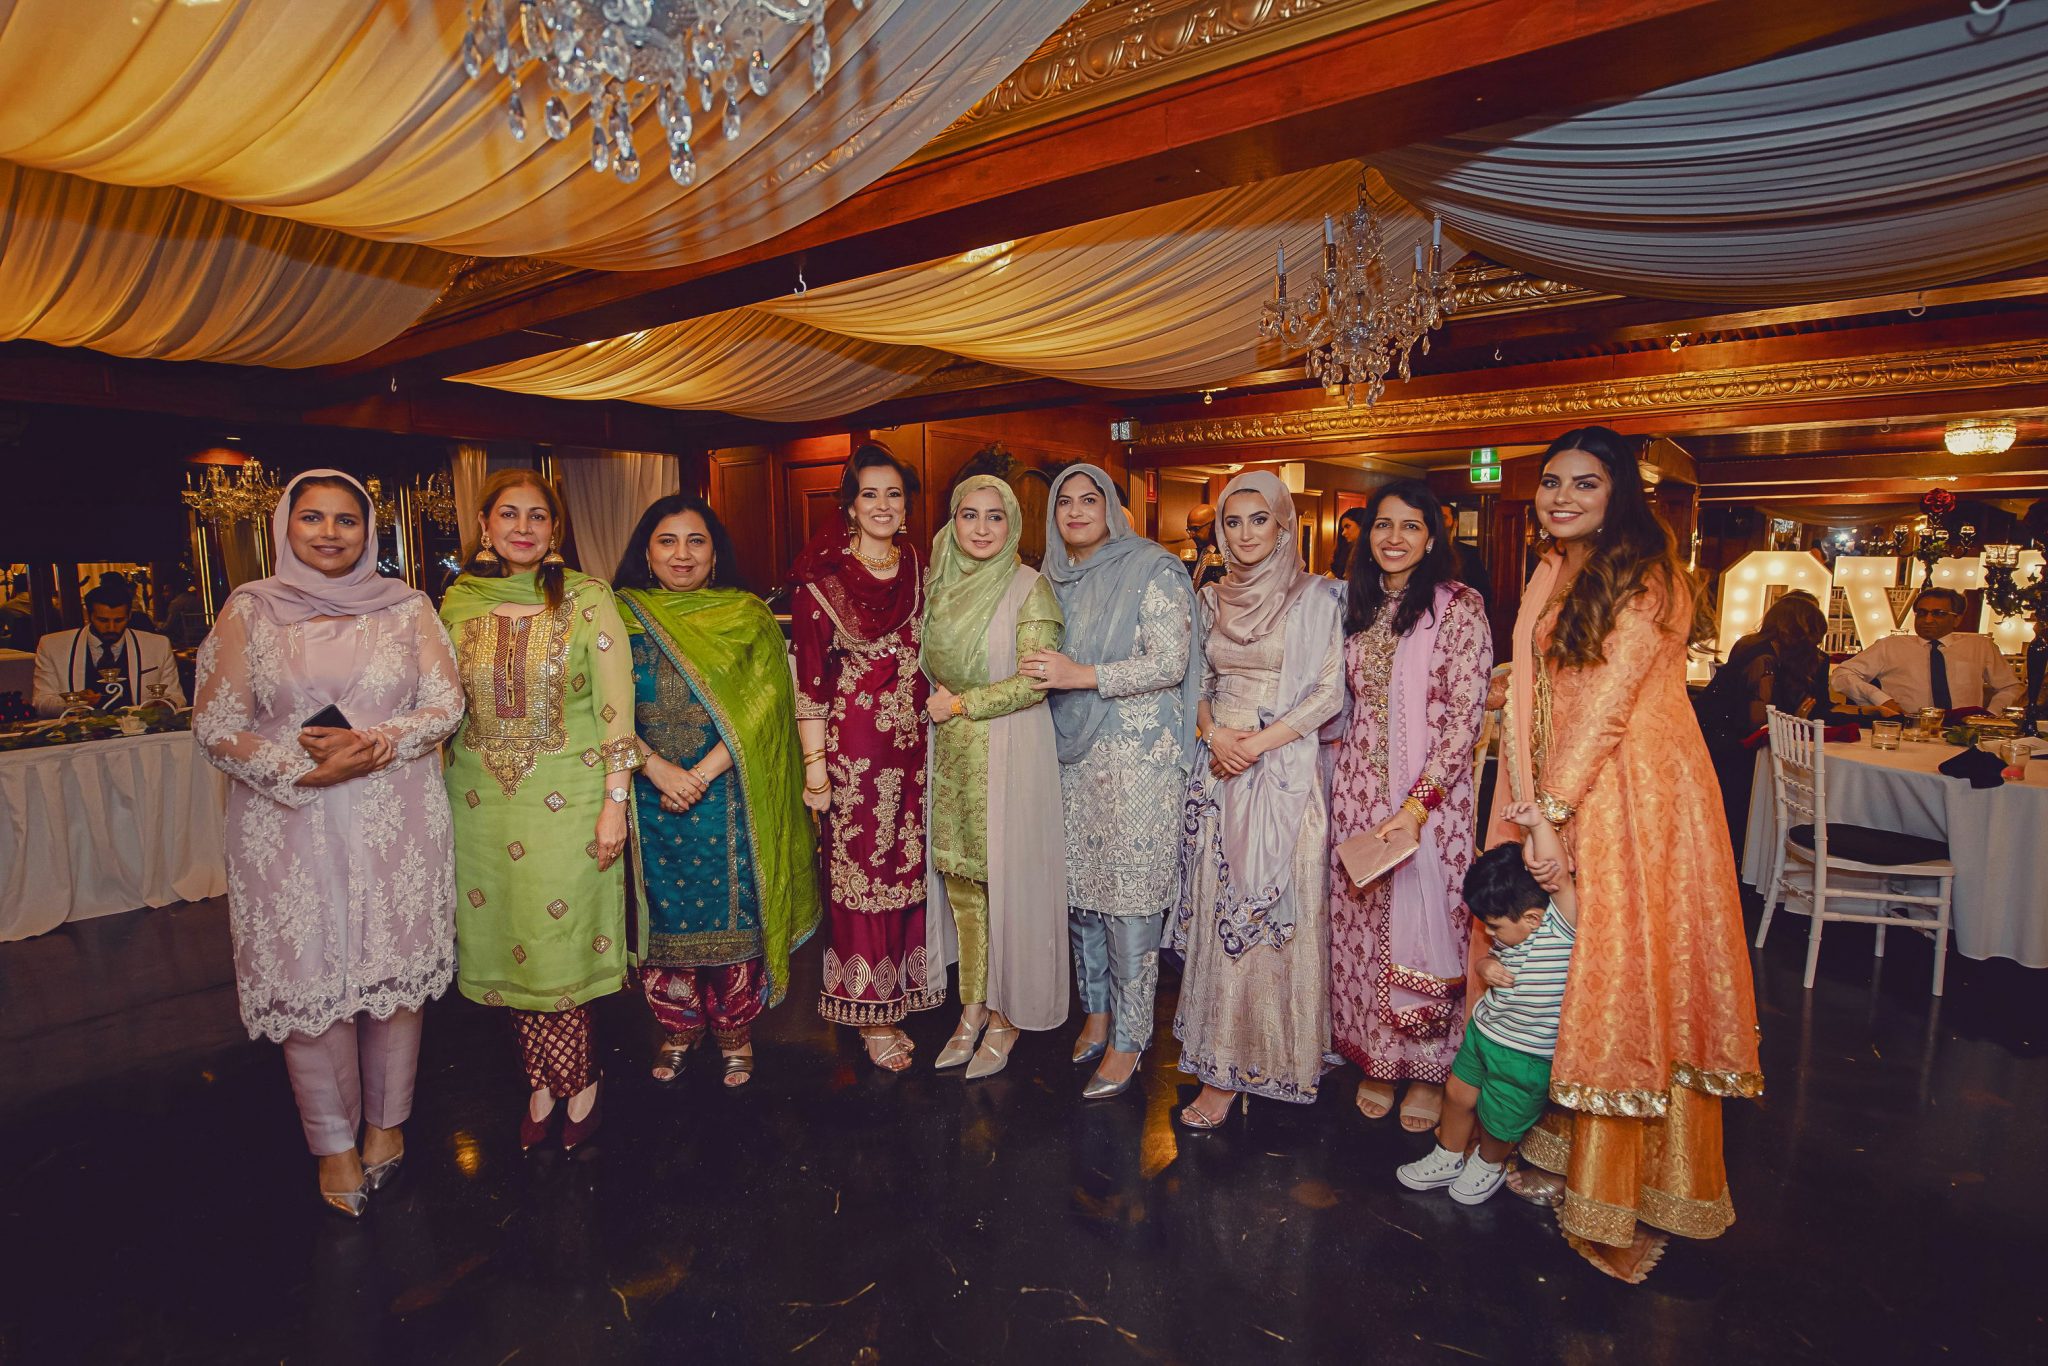 All girls smiling to the camera during the reception